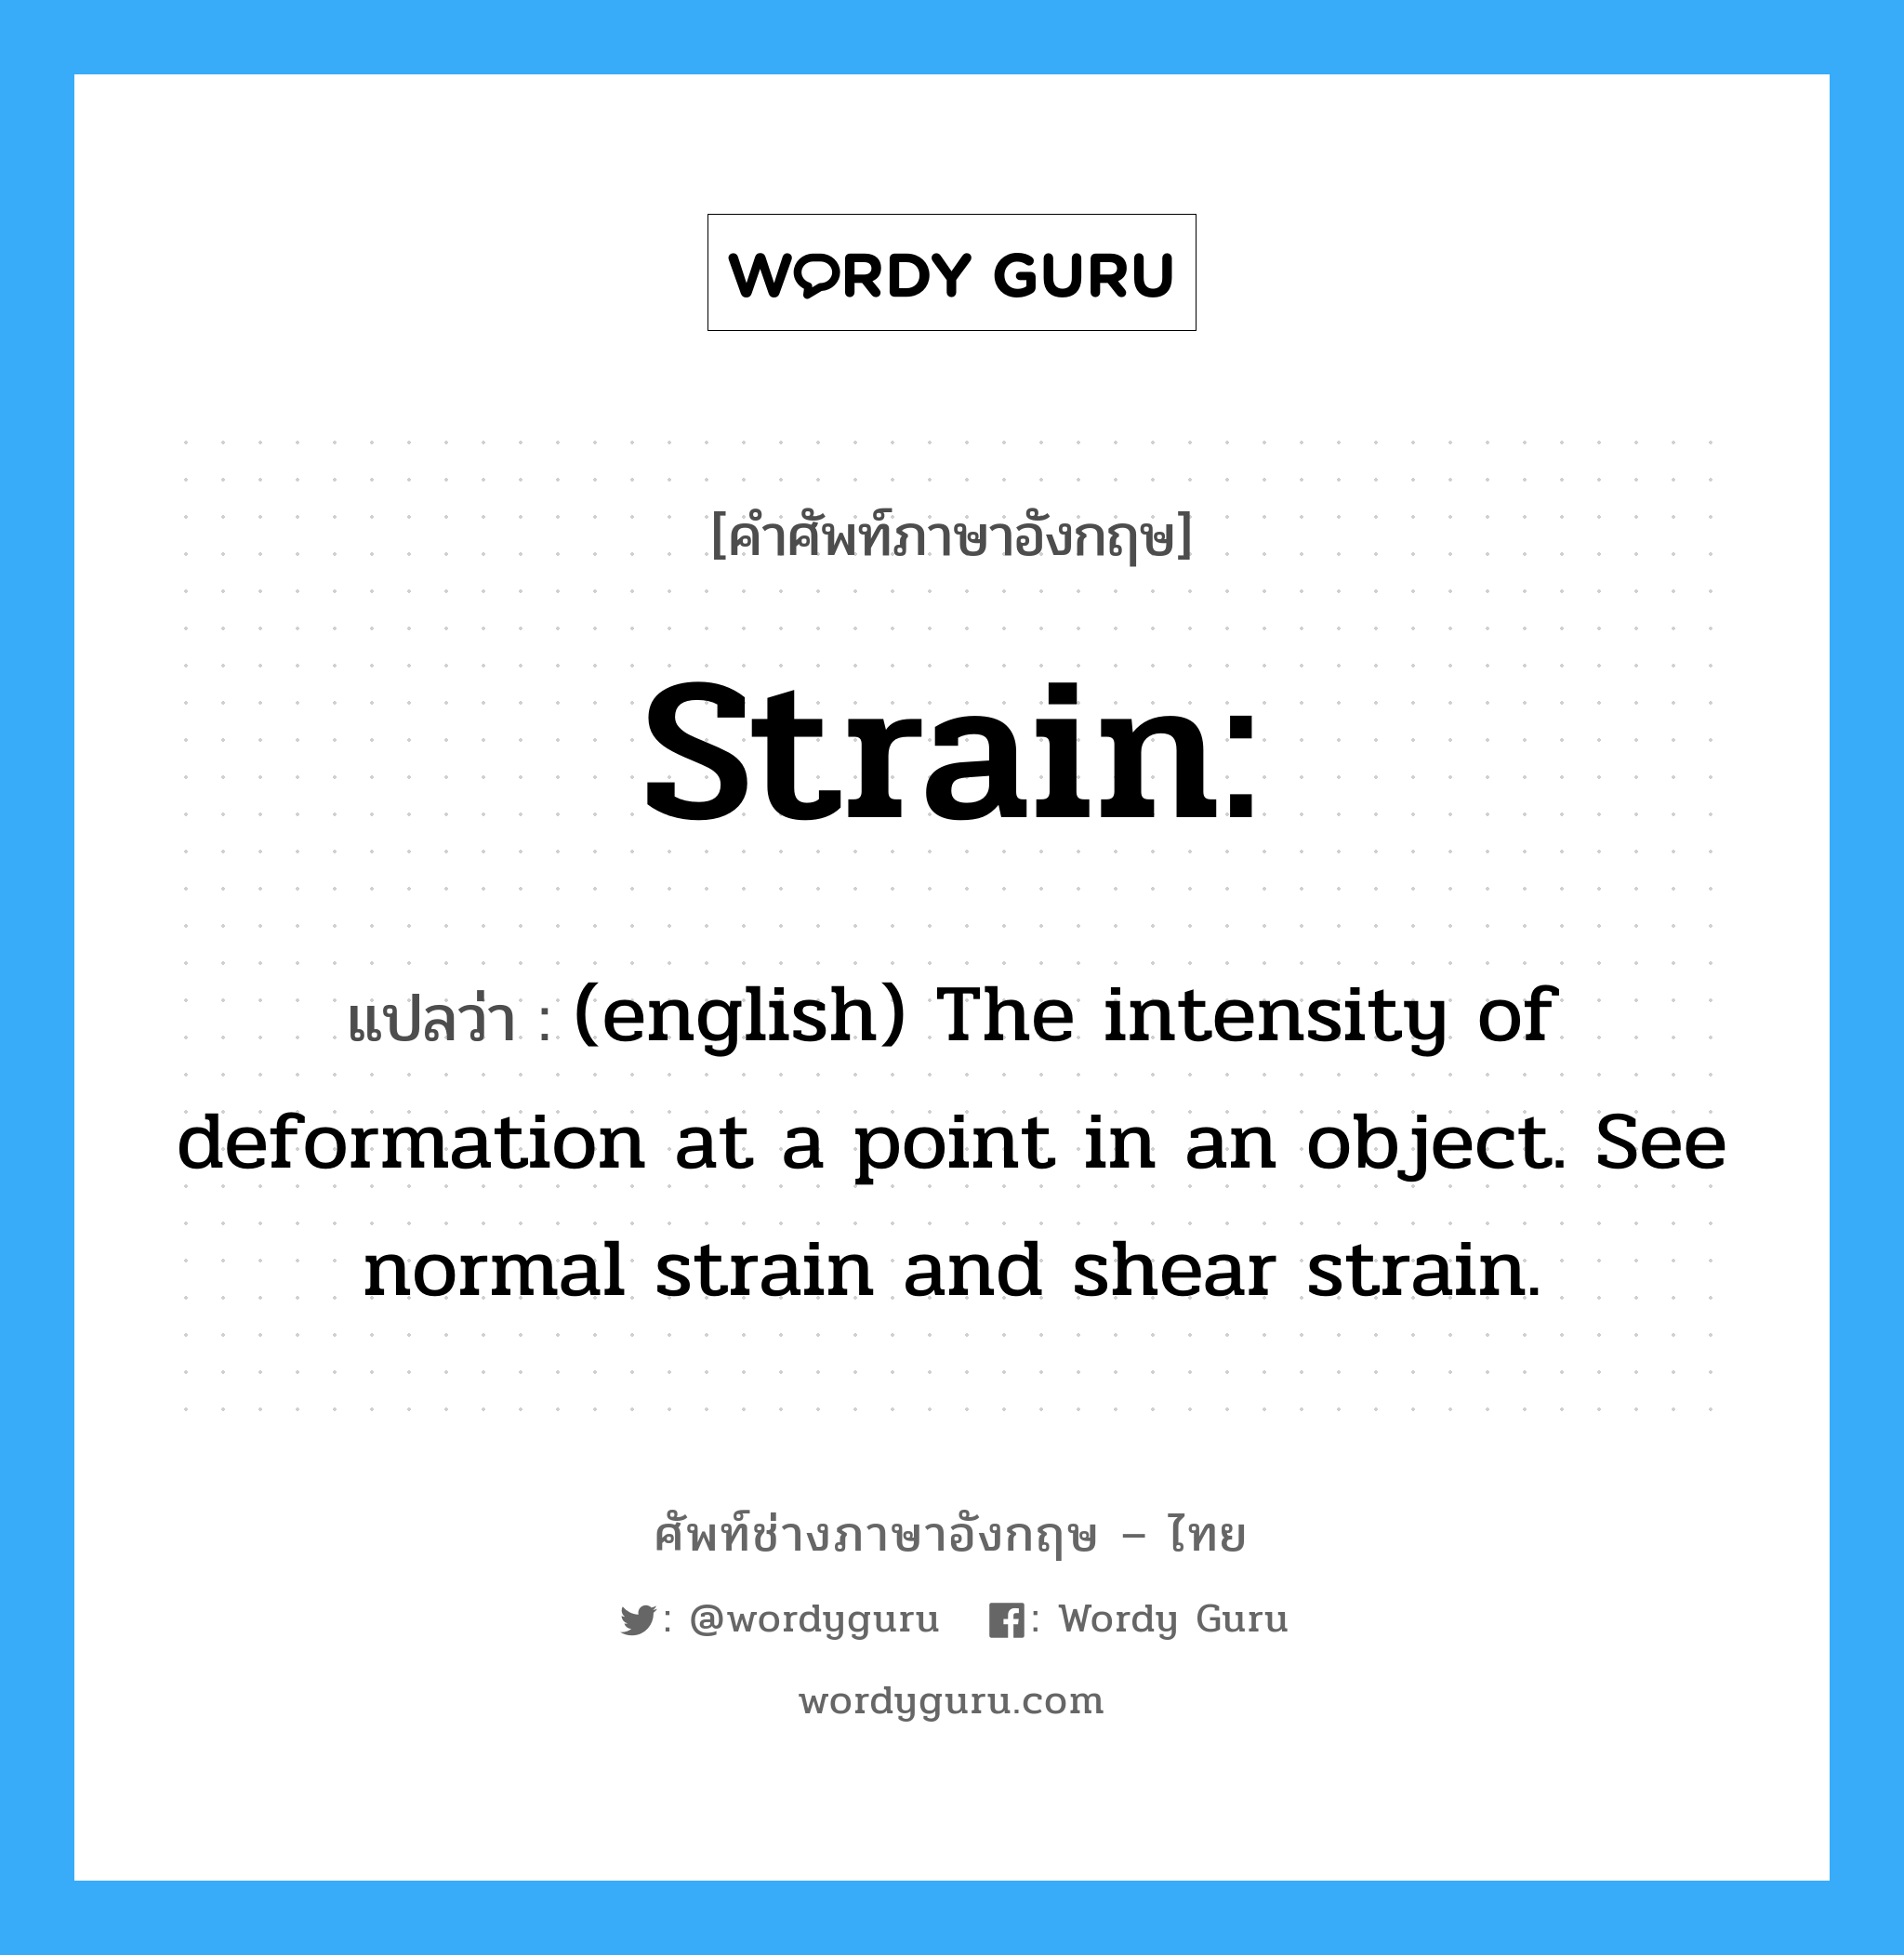 Strain: แปลว่า?, คำศัพท์ช่างภาษาอังกฤษ - ไทย Strain: คำศัพท์ภาษาอังกฤษ Strain: แปลว่า (english) The intensity of deformation at a point in an object. See normal strain and shear strain.